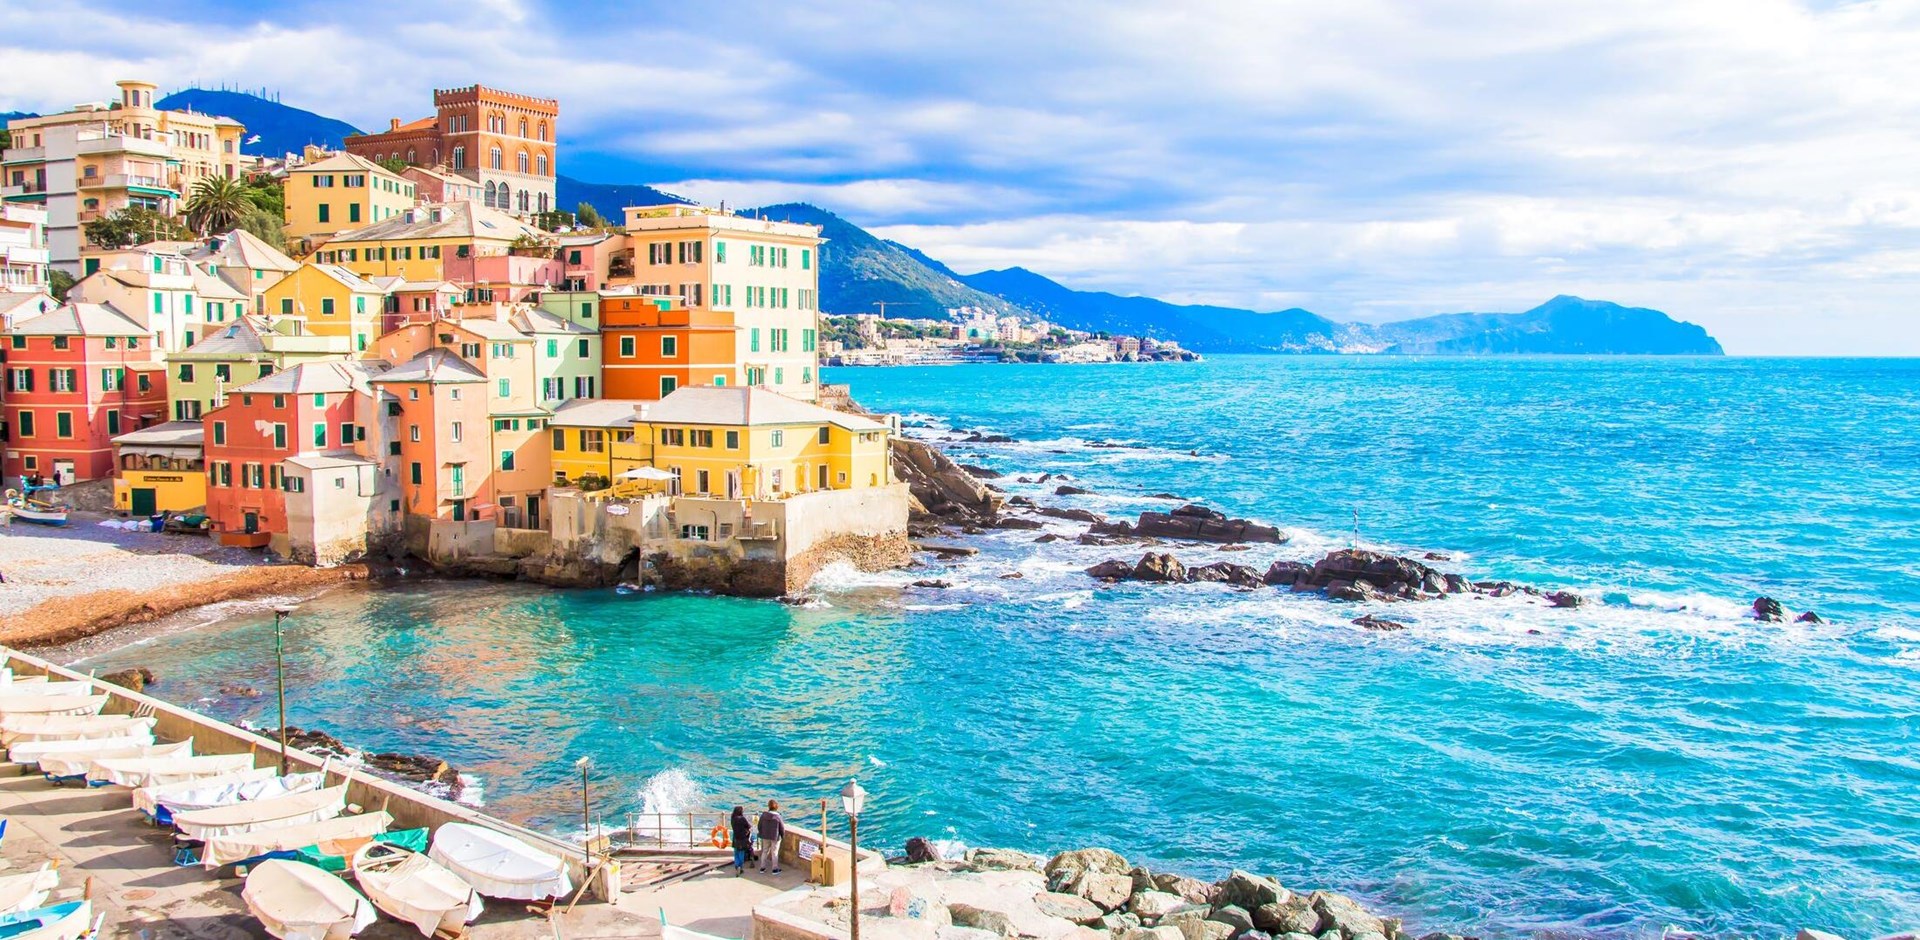 Sea in a winter day in Boccadasse, a district of Genoa in Italy,